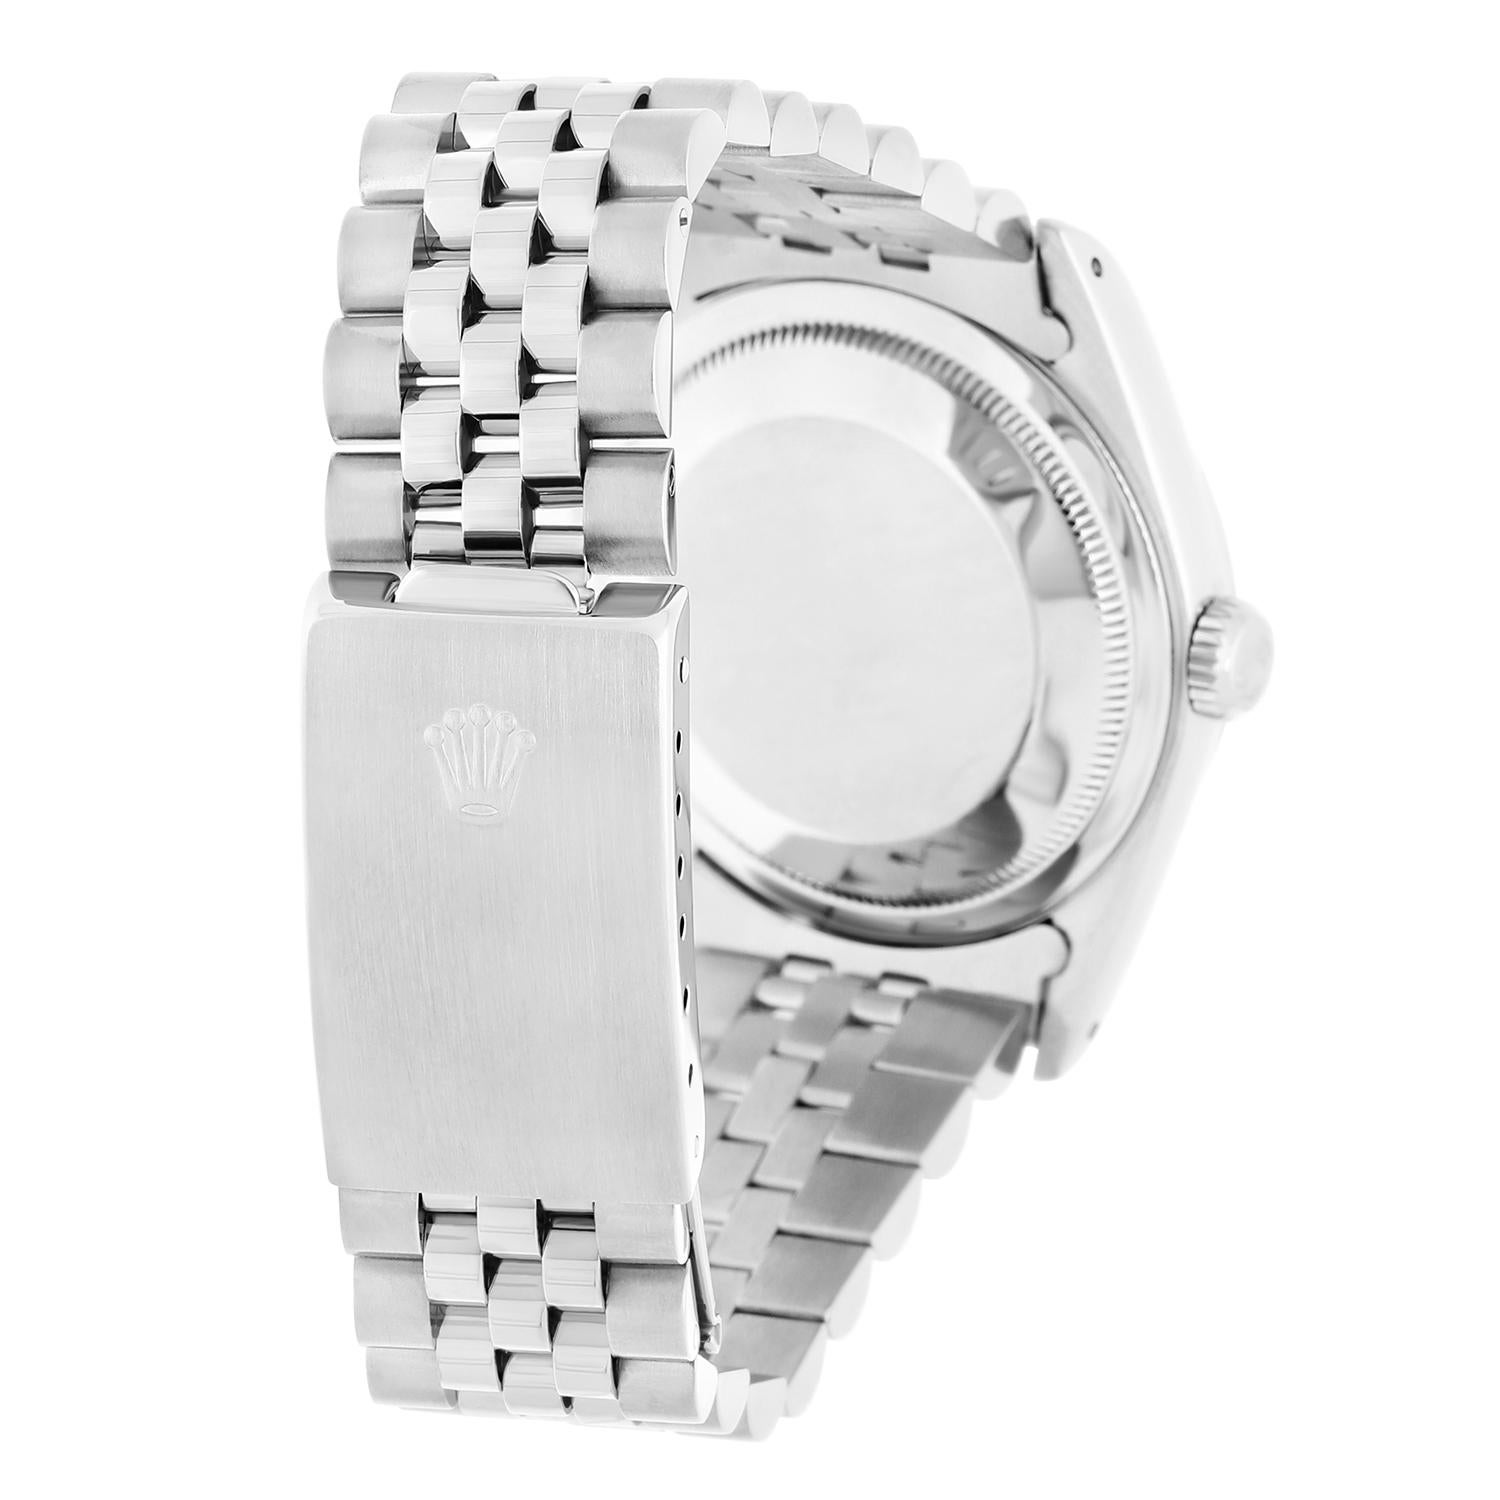 Women's or Men's Rolex Datejust 36mm Stainless Steel 16200 Silver Dial, Jubilee Circa 1991